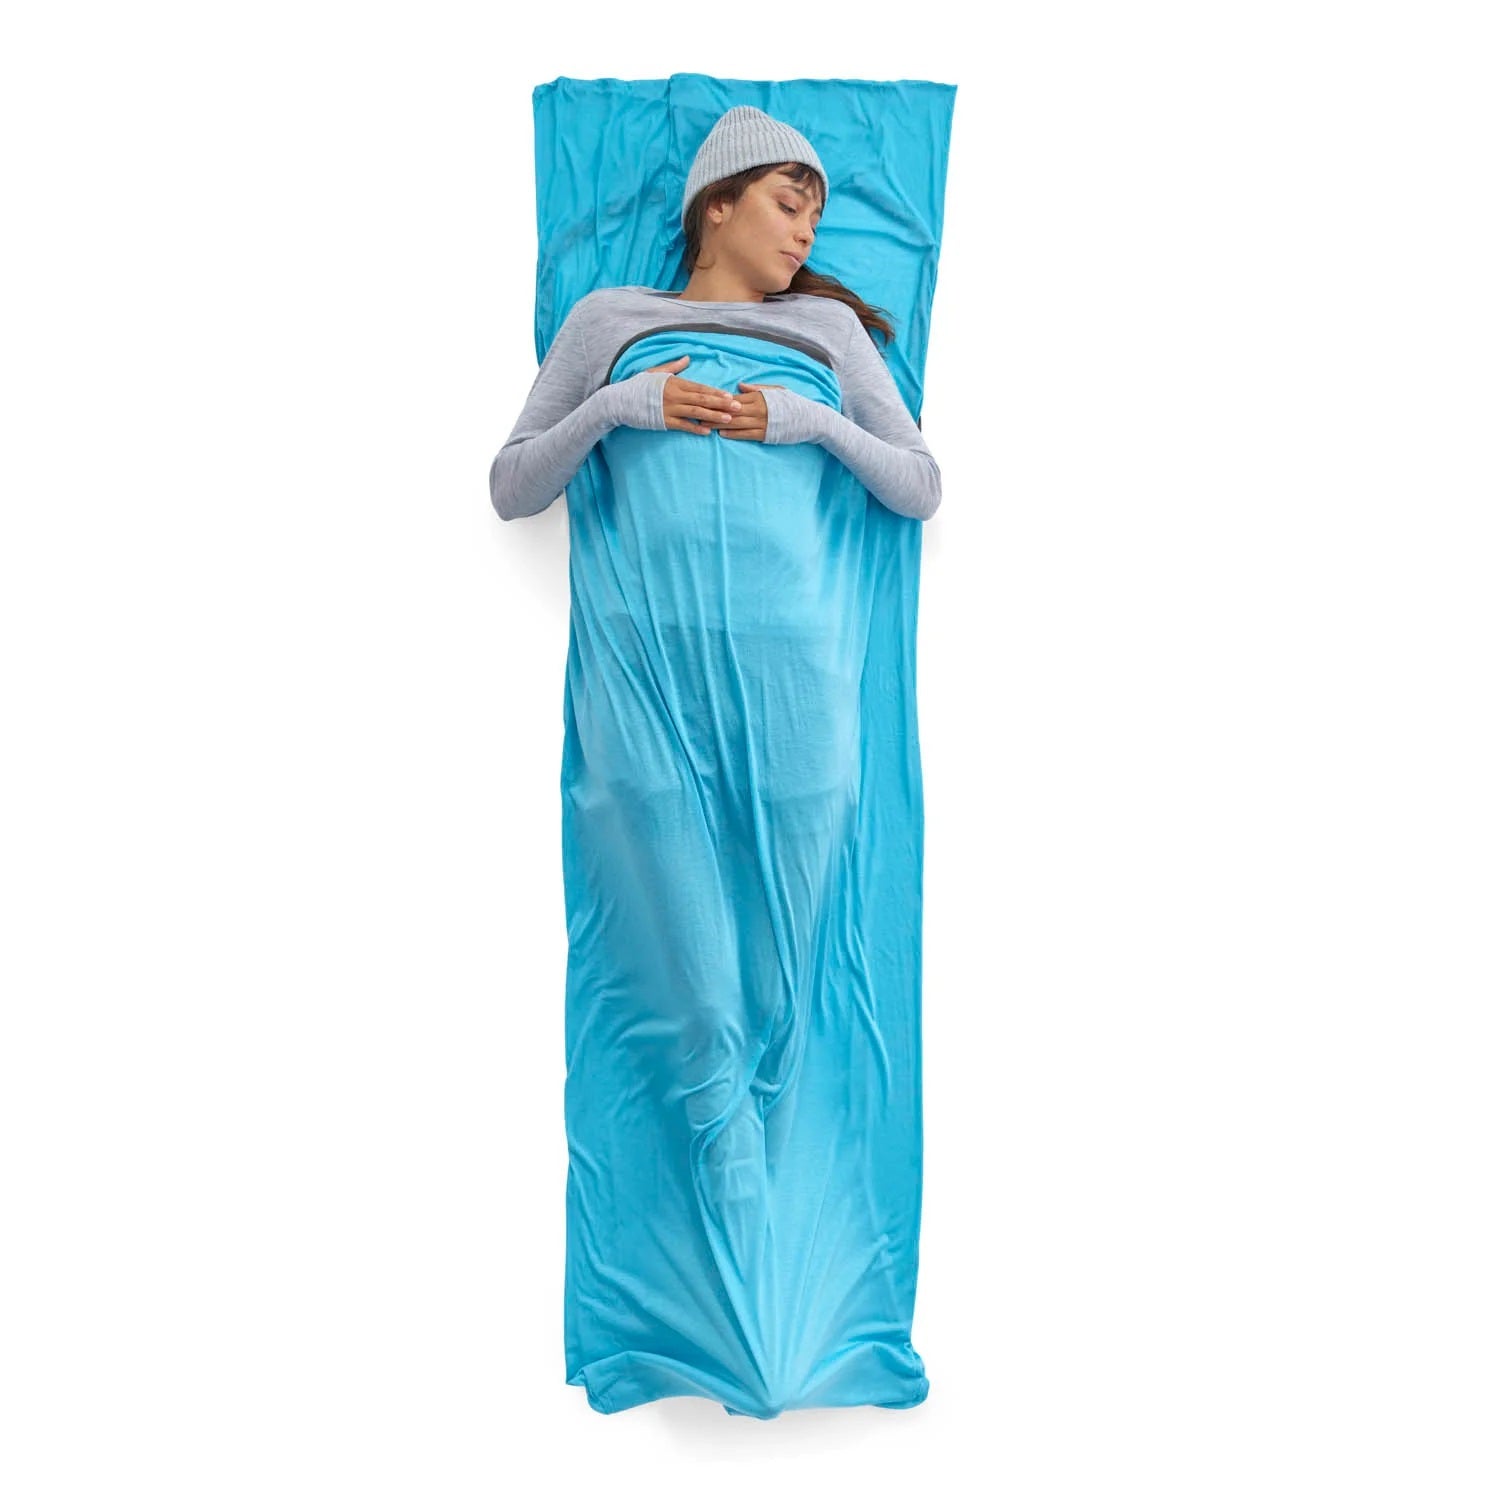 Sea to Summit Sea To Summit Breeze Sleeping Bag Liner - Rectangular with Drawcord or Pillow Sleeve